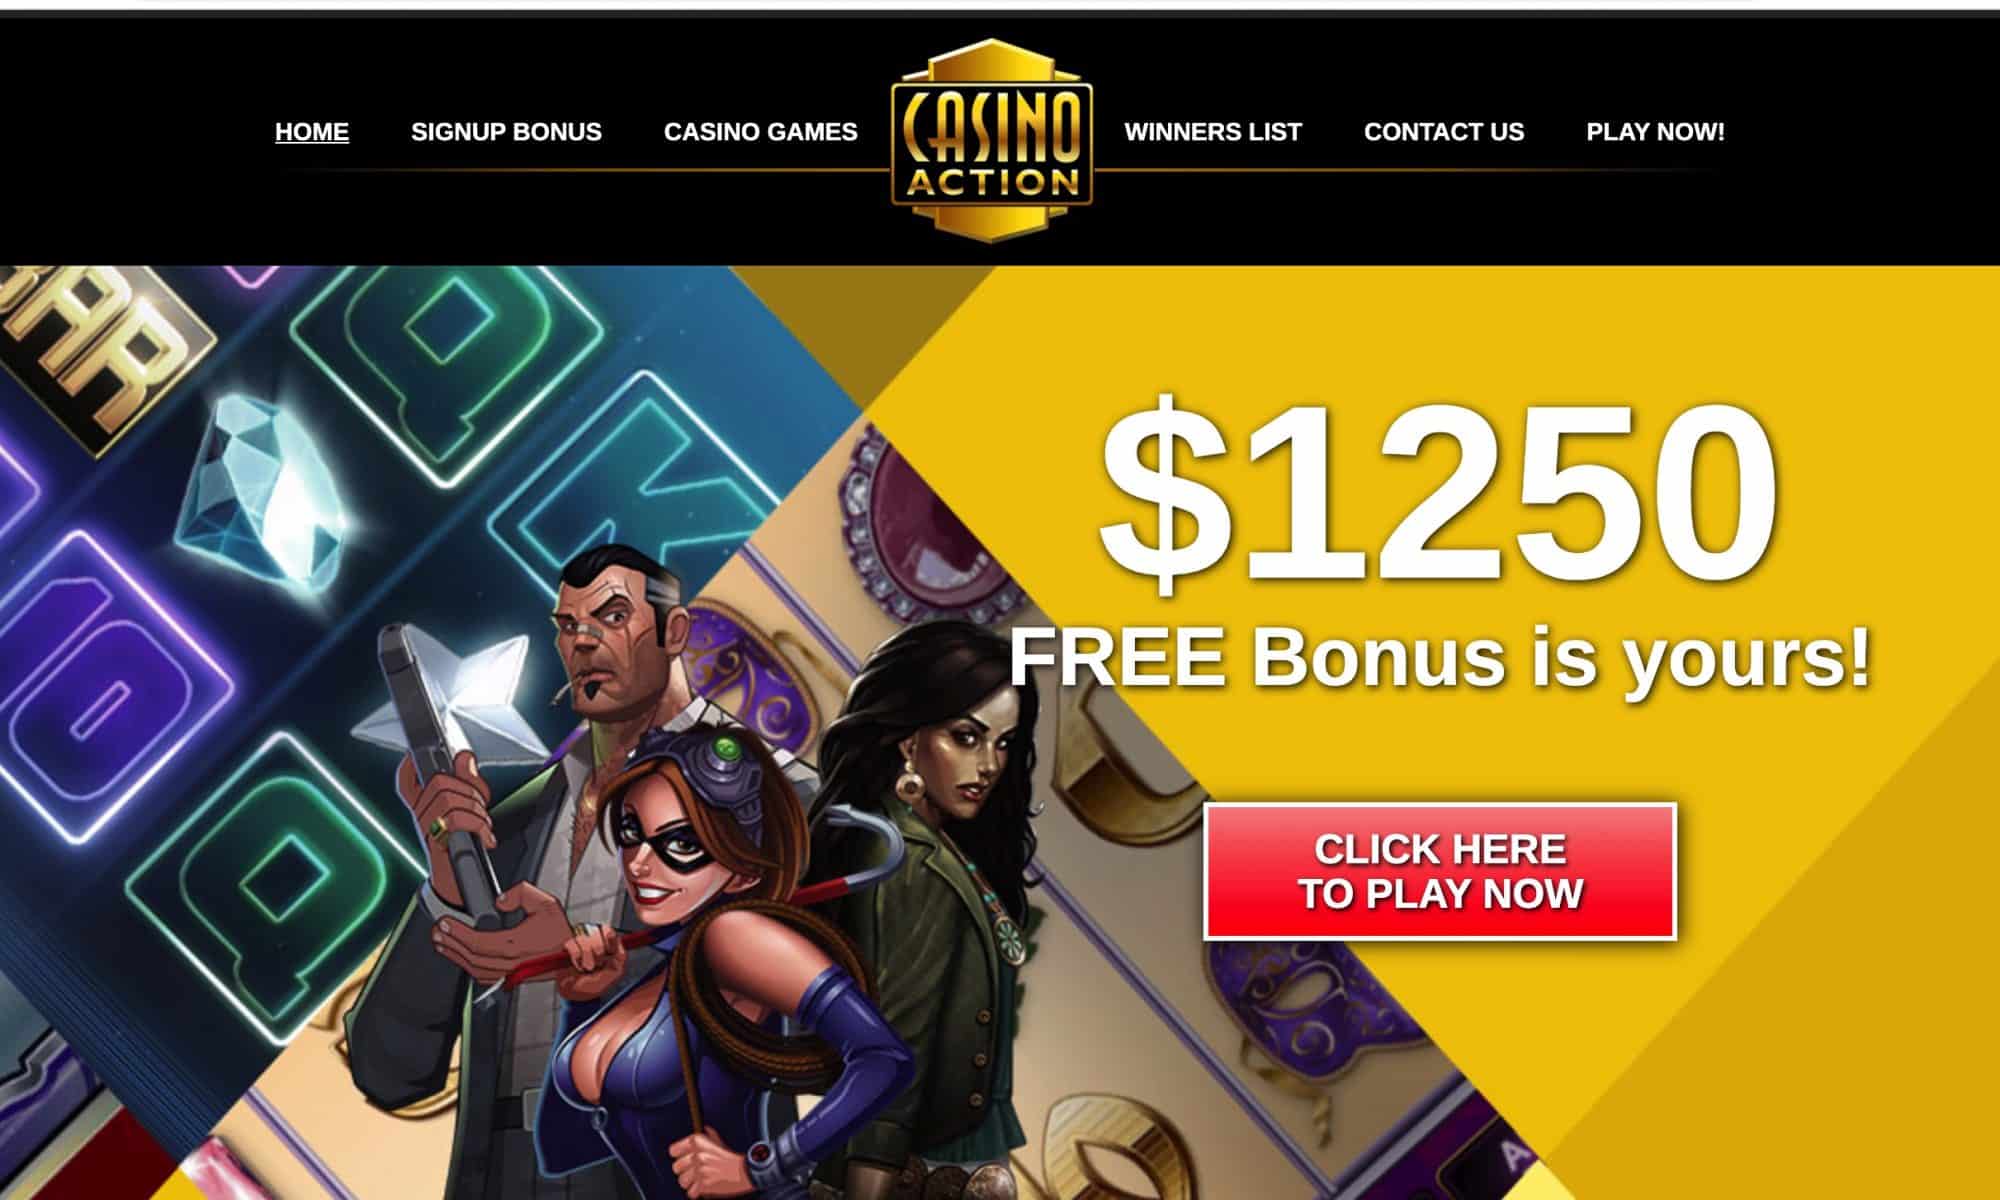 Casino Action - European provider: 1 hour free play